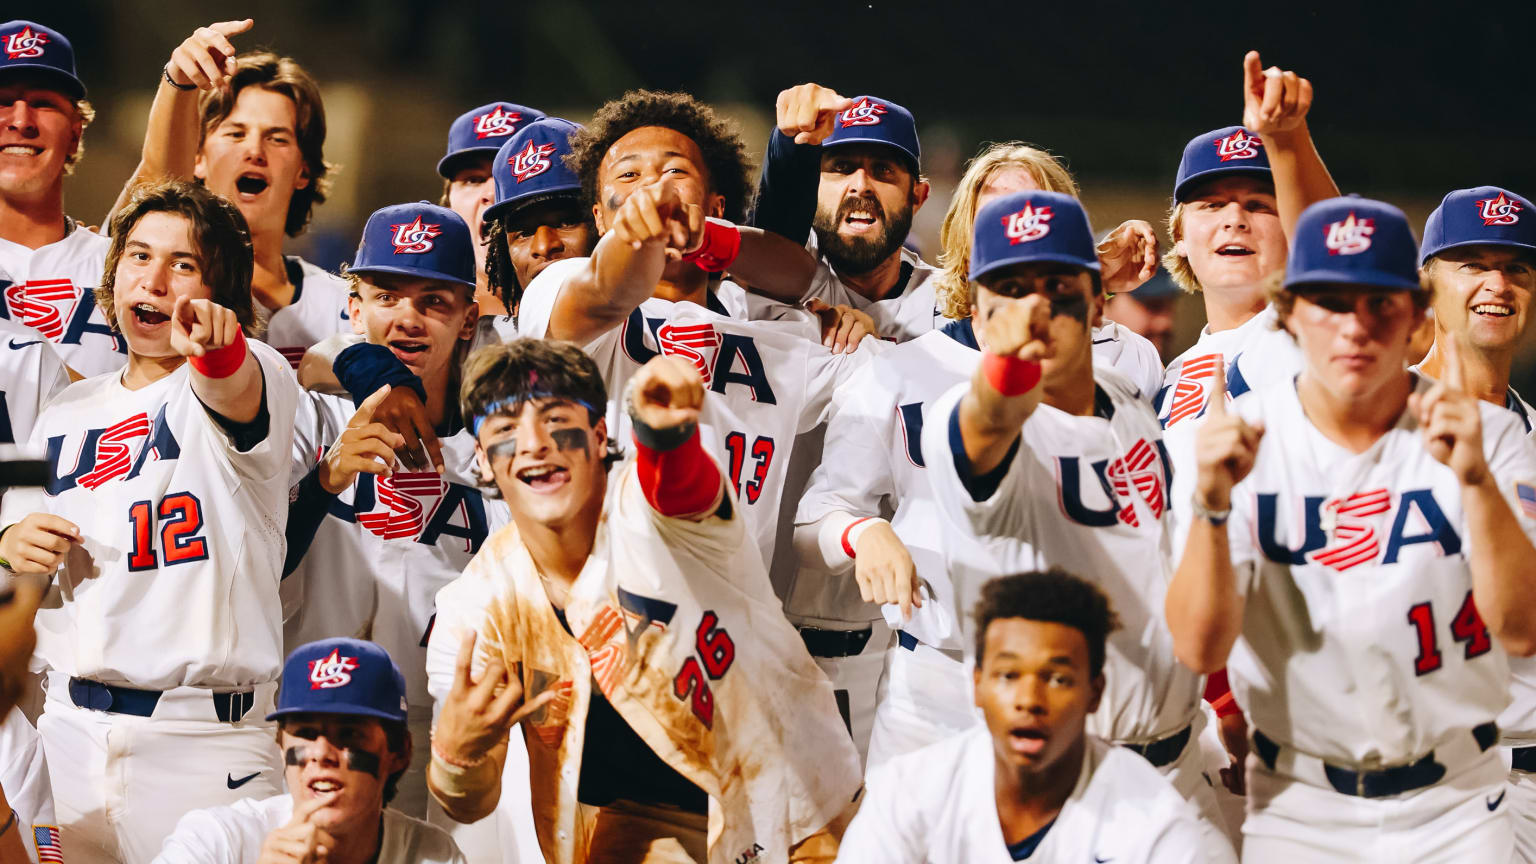 Baseball: USA wins its seventh world title in the “Cadets” category in a hard-fought final with Cuba